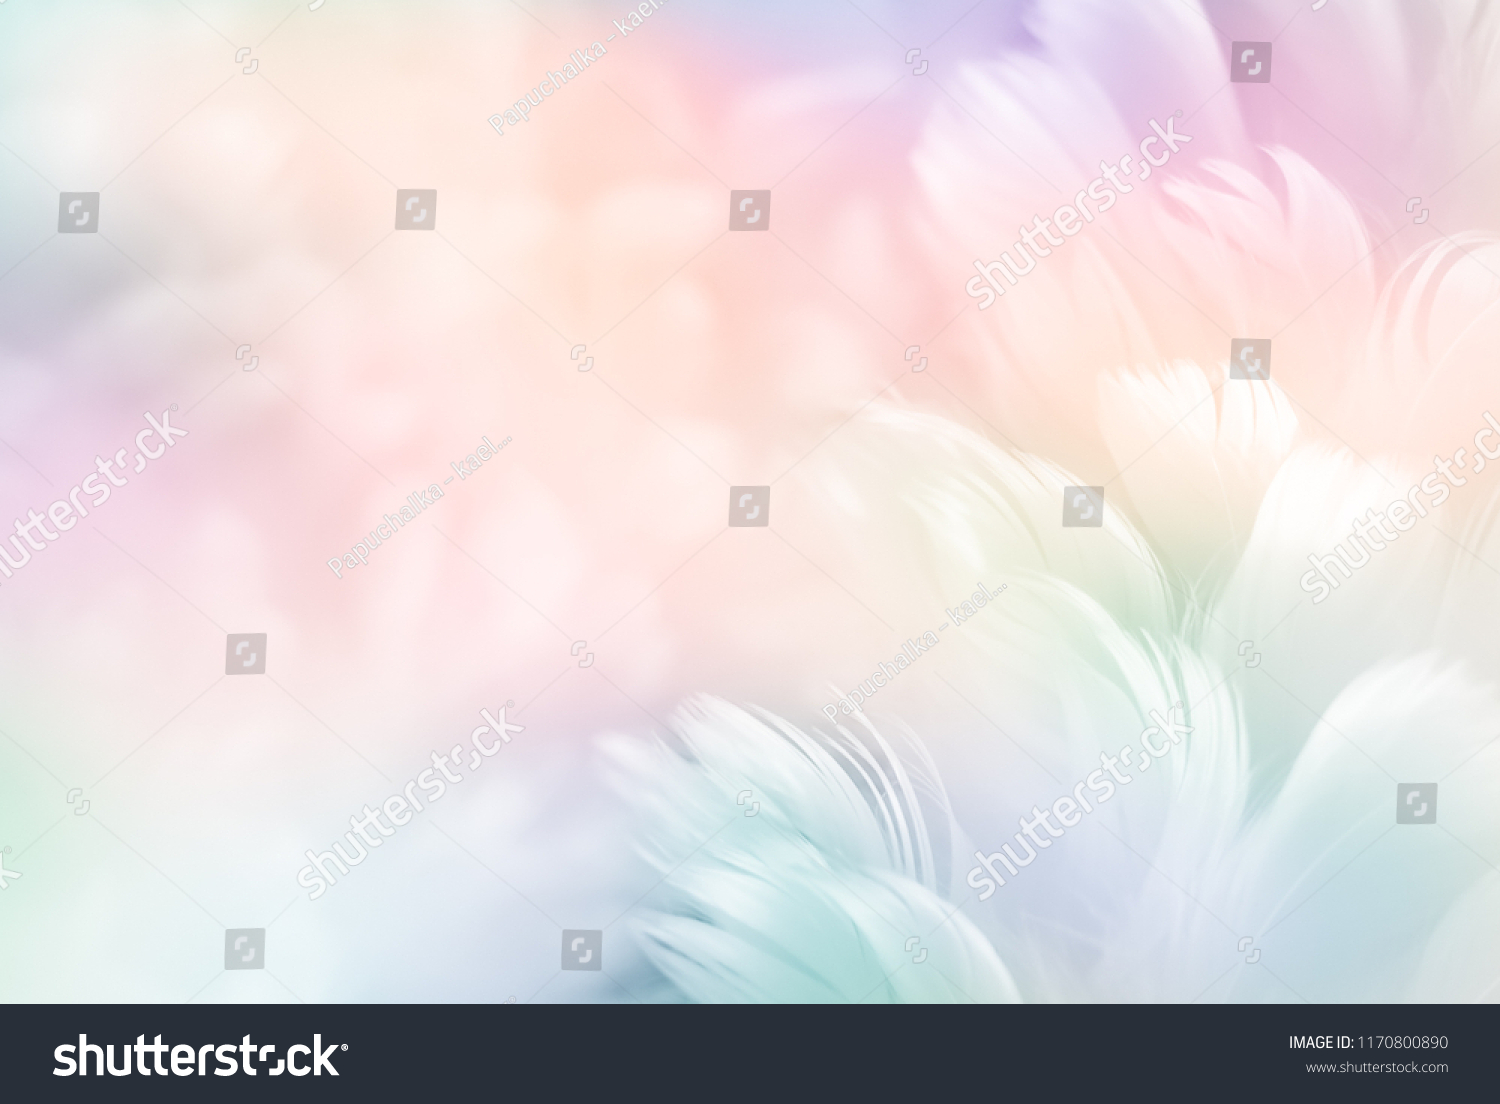 Abstract feather rainbow patchwork background. Closeup image of white fluffy feather under colorful pastel neon foggy mist. Fashion Color Trends Spring Summer 2019 - soft focus. #1170800890